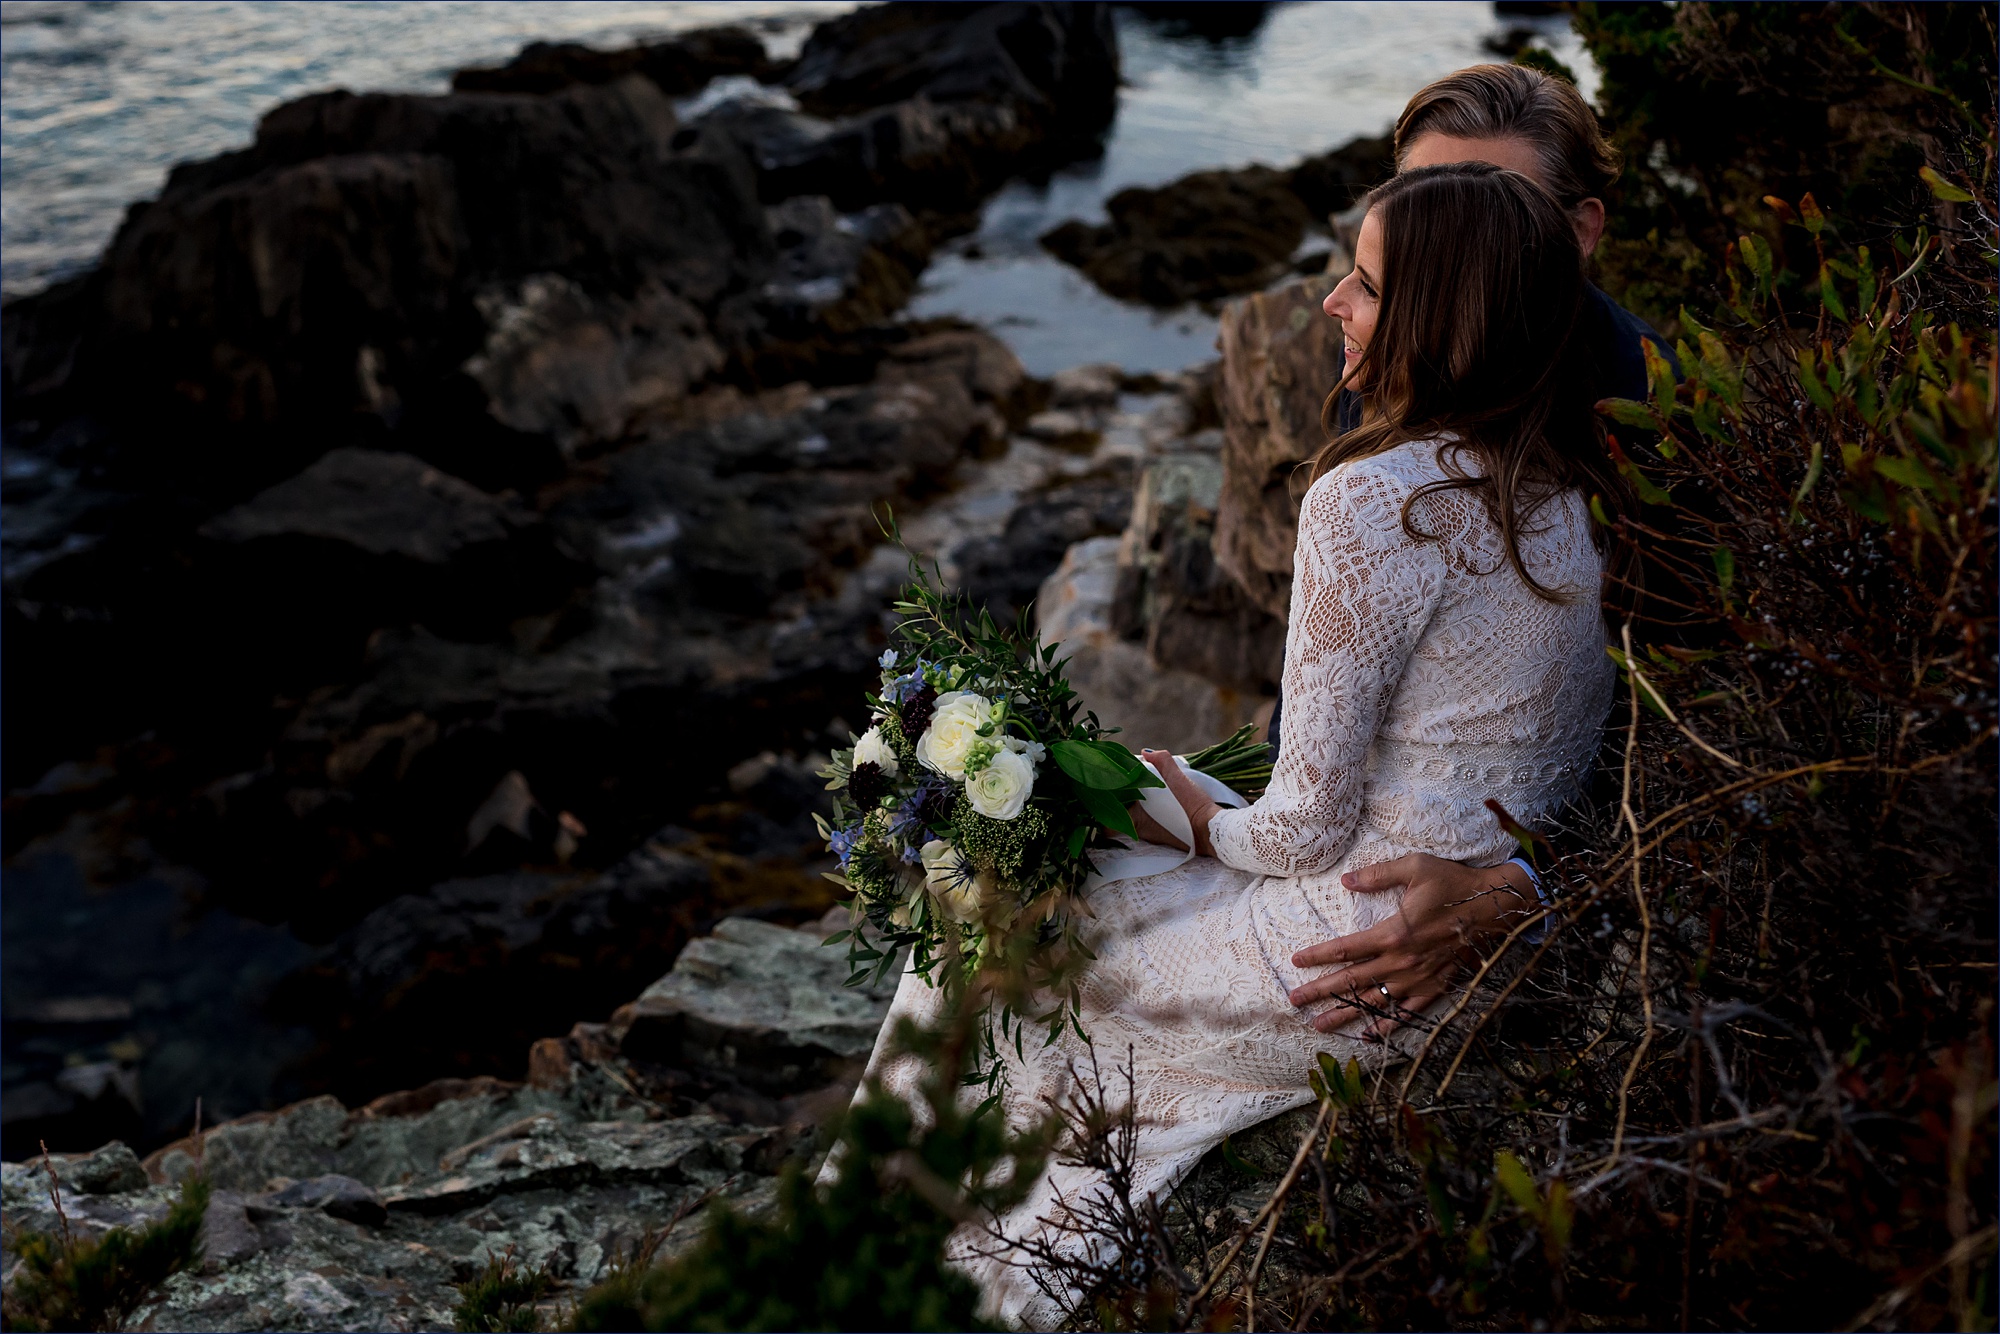 The newlyweds cuddle close on the rocks after their Cape Arundel Inn wedding day in Kennebunkport Maine